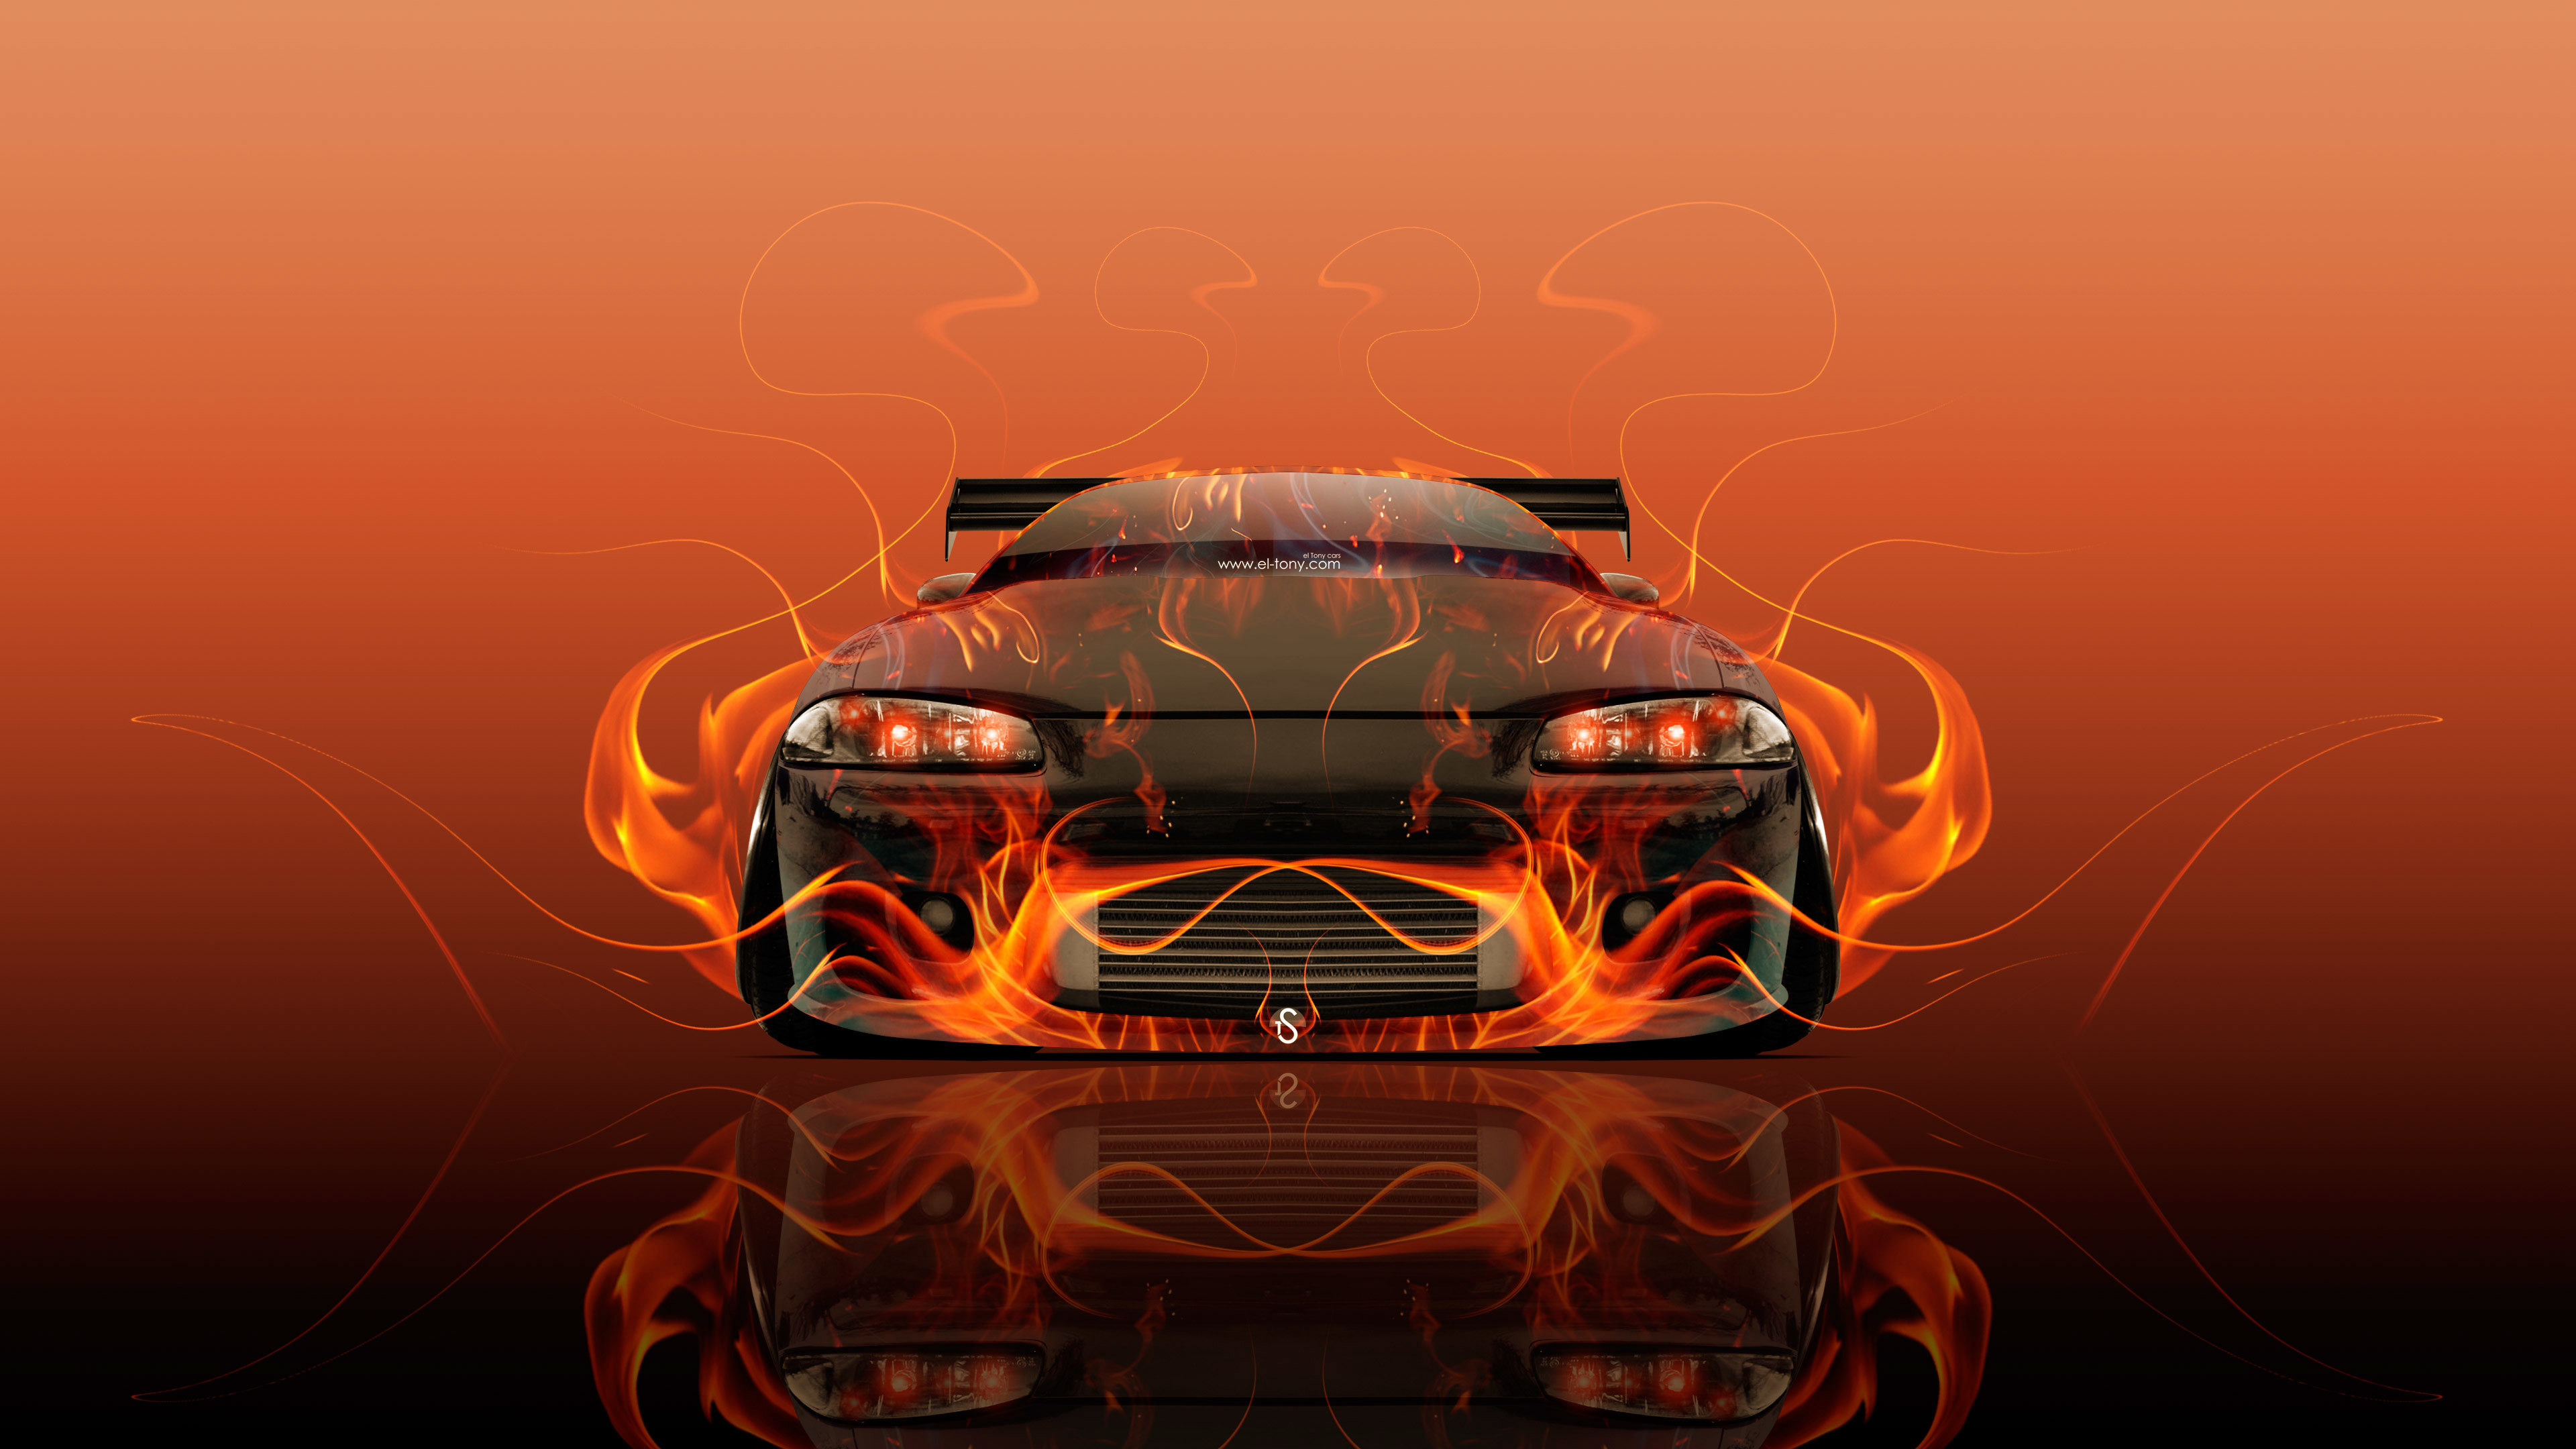 3840x2160 Mitsubishi-Eclipse-JDM-Tuning-Front-Fire-Abstract-Car-